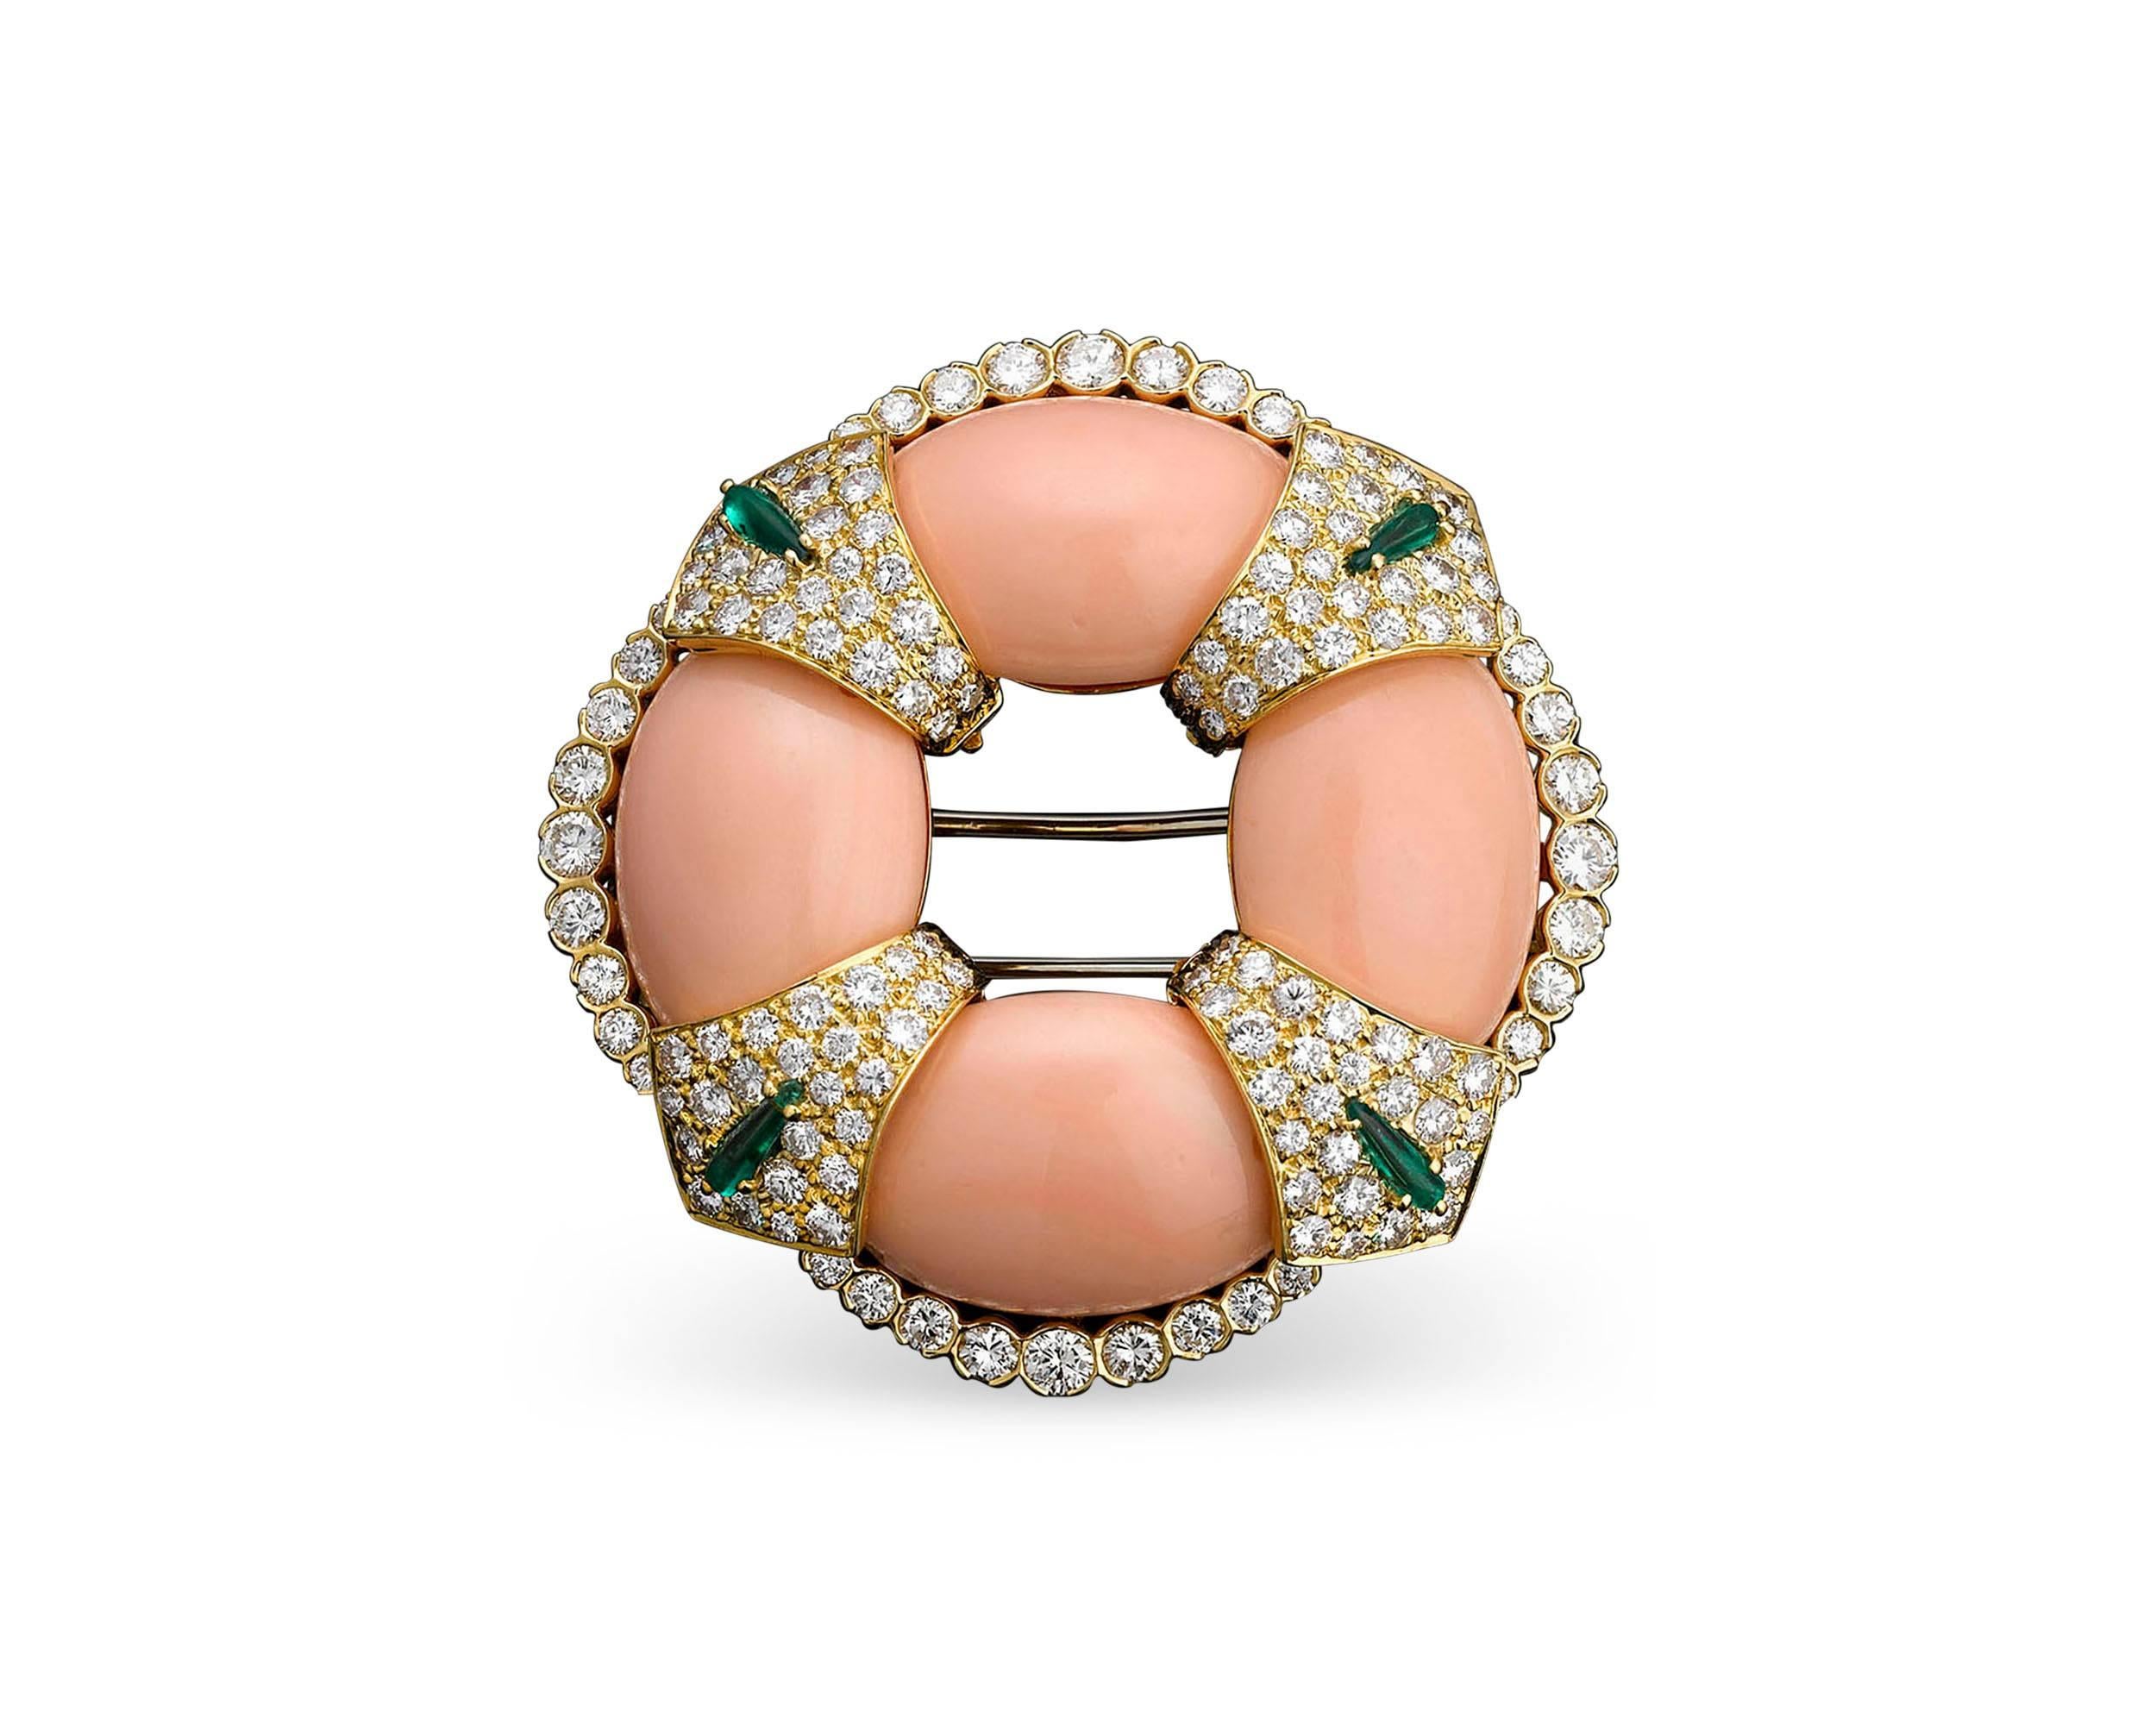 This enchanting coral and diamond brooch by David Webb exudes a classic refinement. Four exquisite coral cabochons takes center stage, each exhibiting the delicate “angel skin” hue. Their subtle beauty is accented by approximately 2.50 carats of